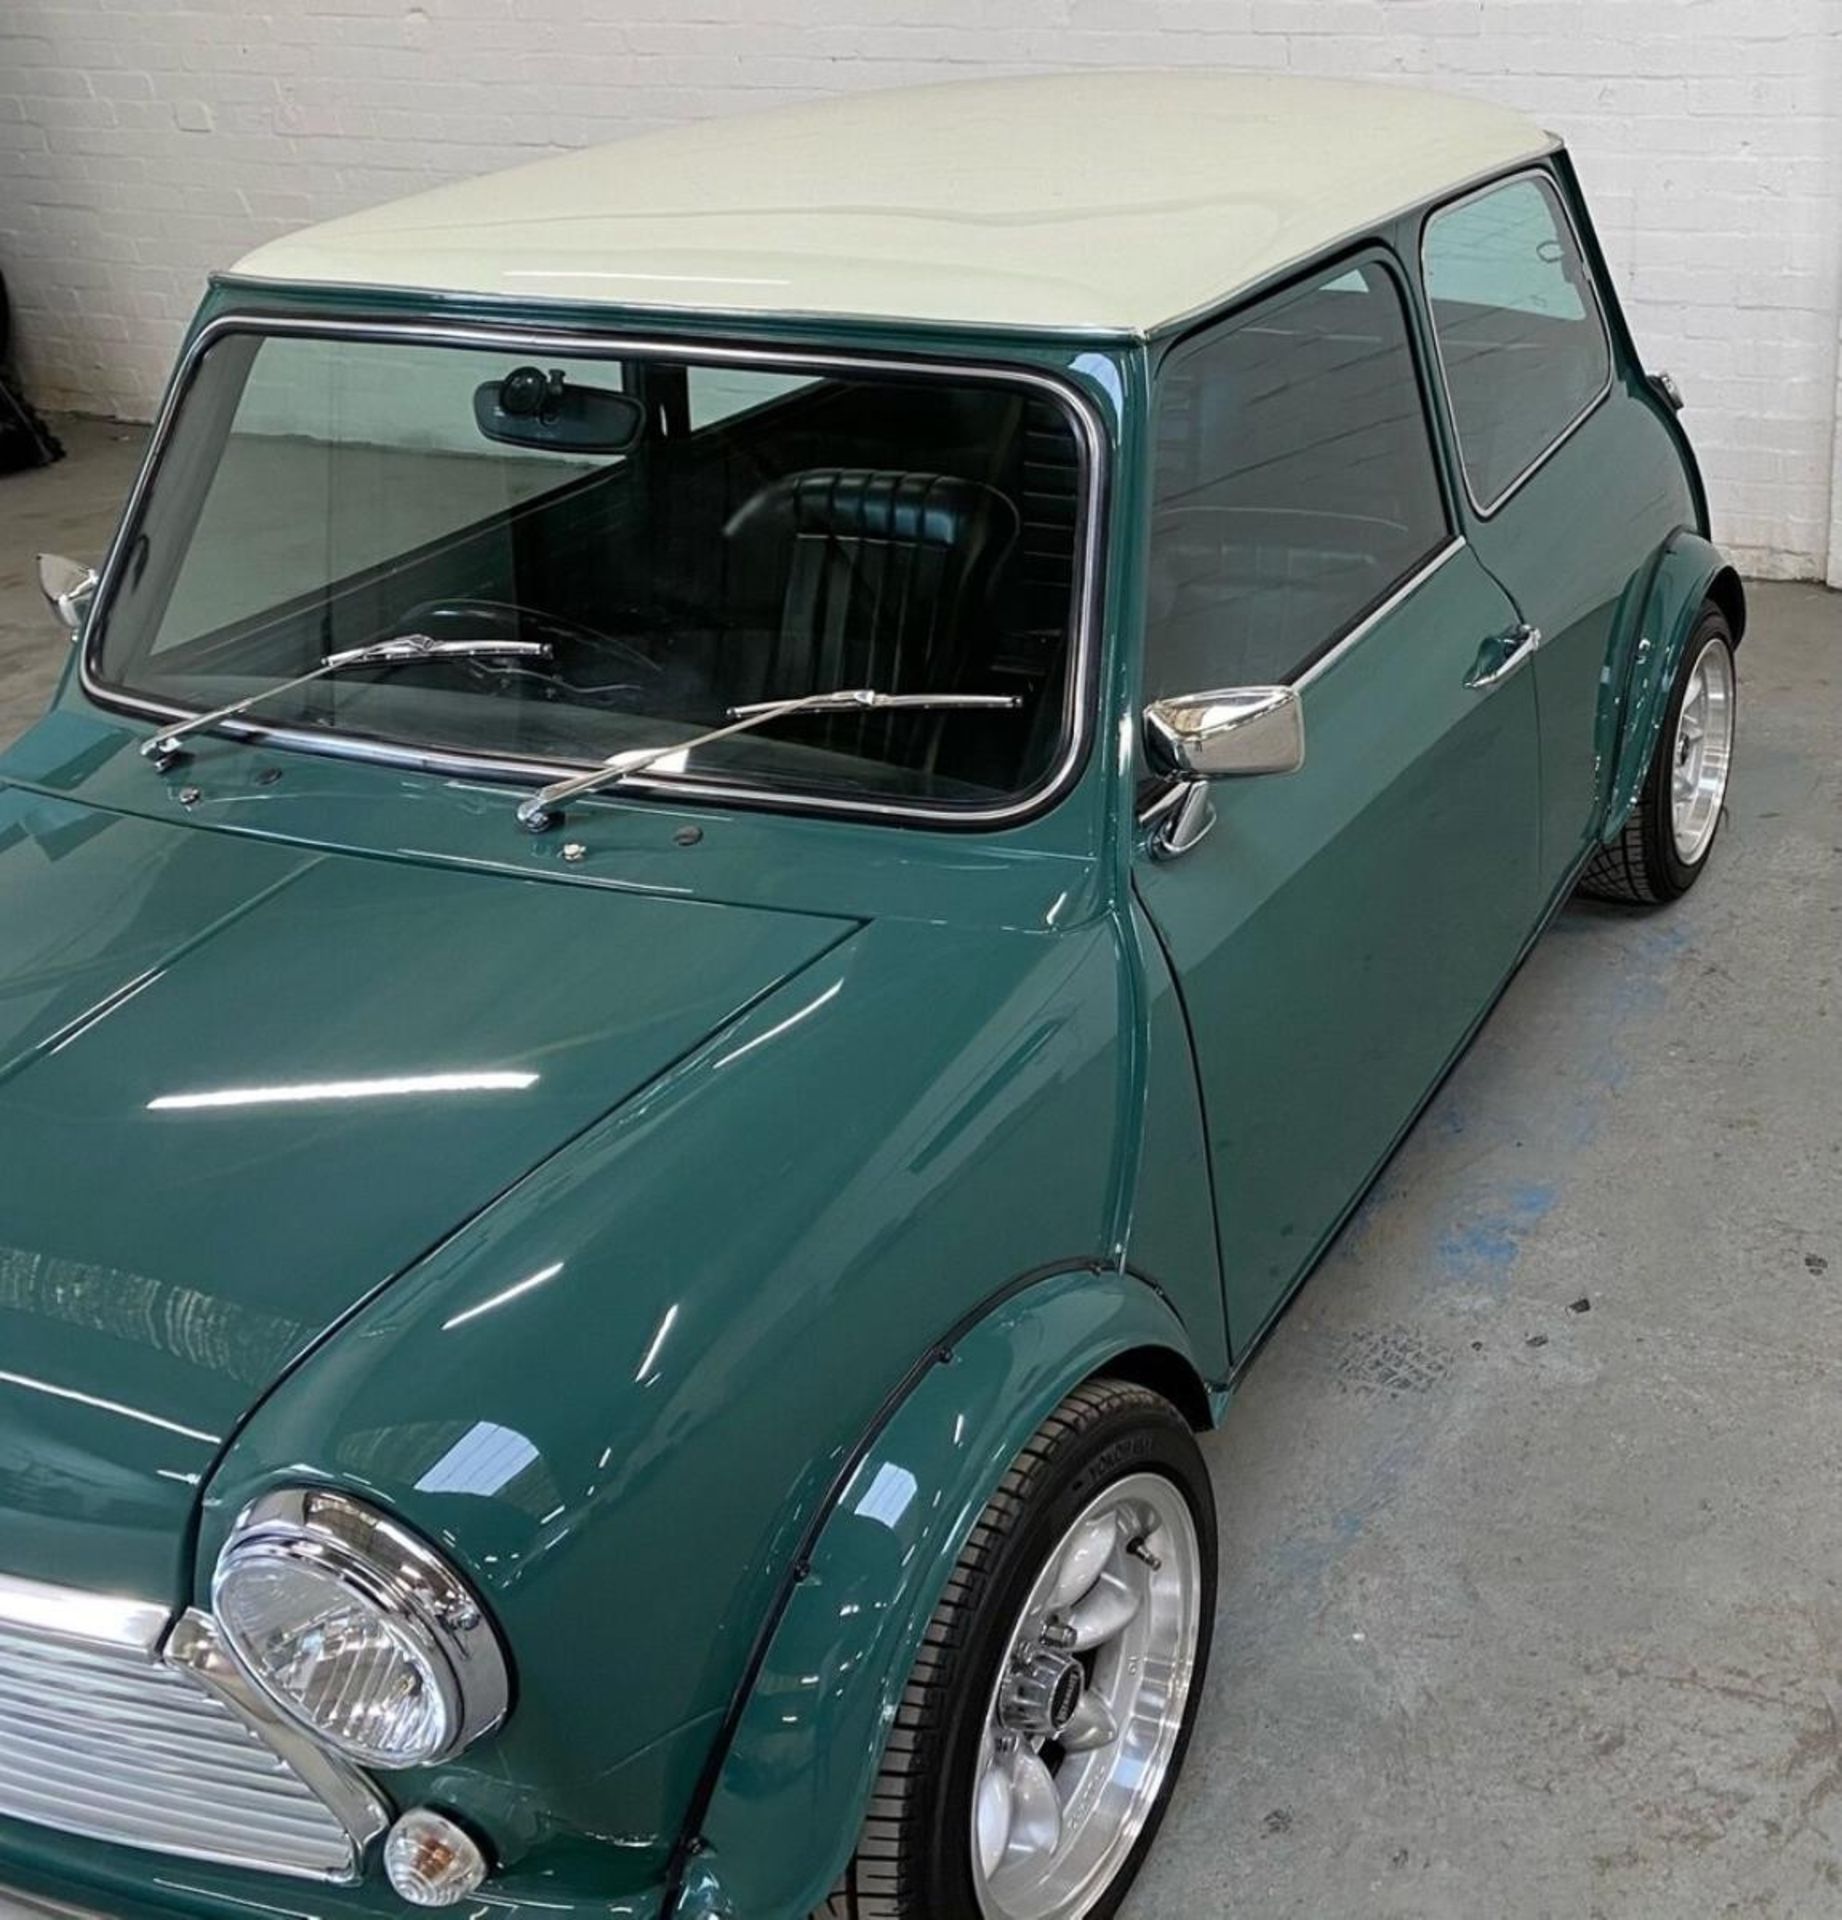 1971 Mini Cooper S Recreation Registration number KFB 656J Green with a white roof Black interior - Image 10 of 18